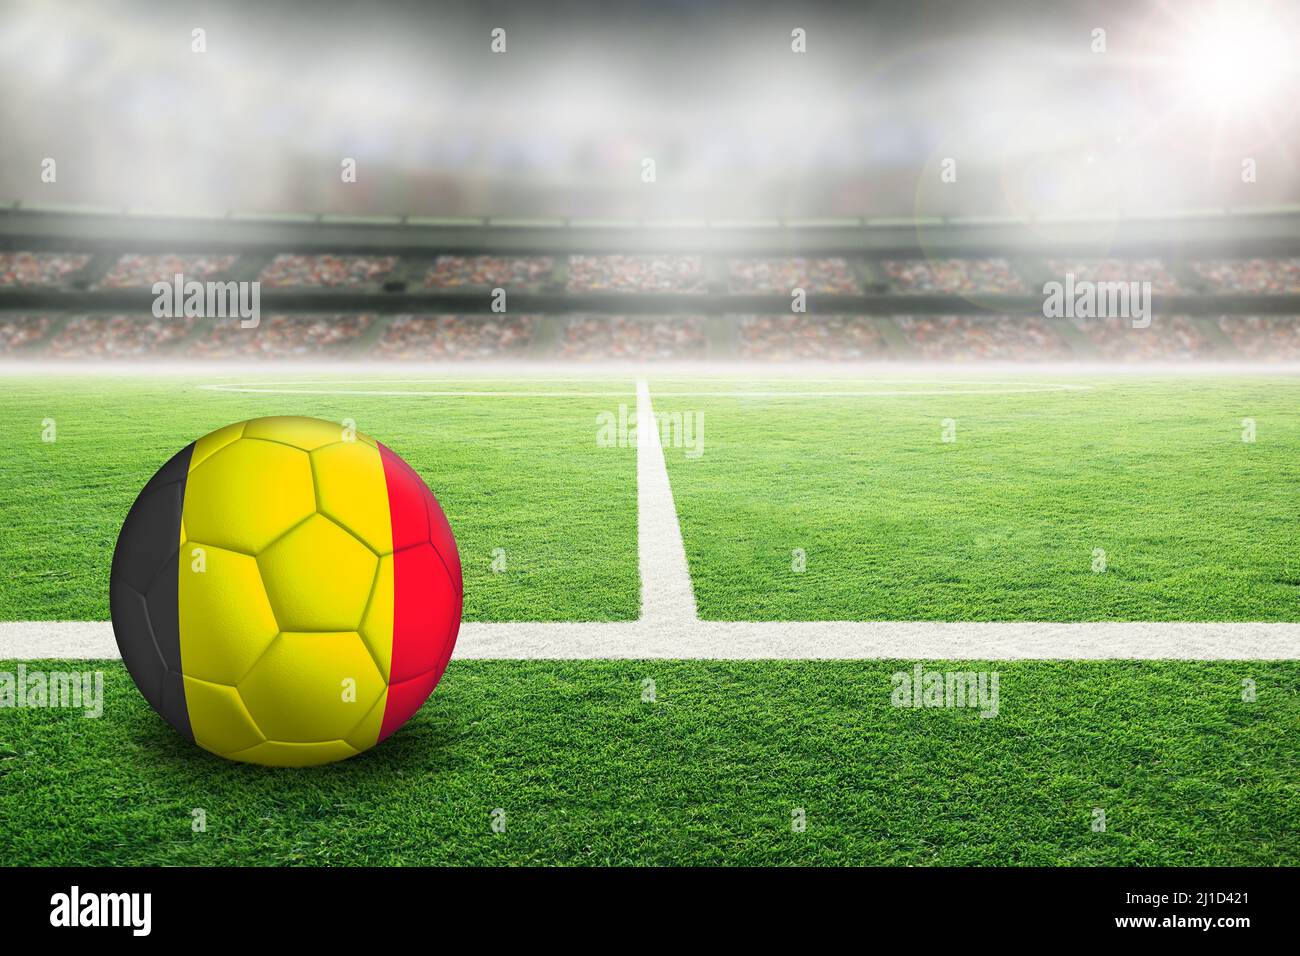 Football in brightly lit outdoor stadium with painted flag of Belgium. Focus on foreground and soccer ball with shallow depth of field on background a Stock Photo